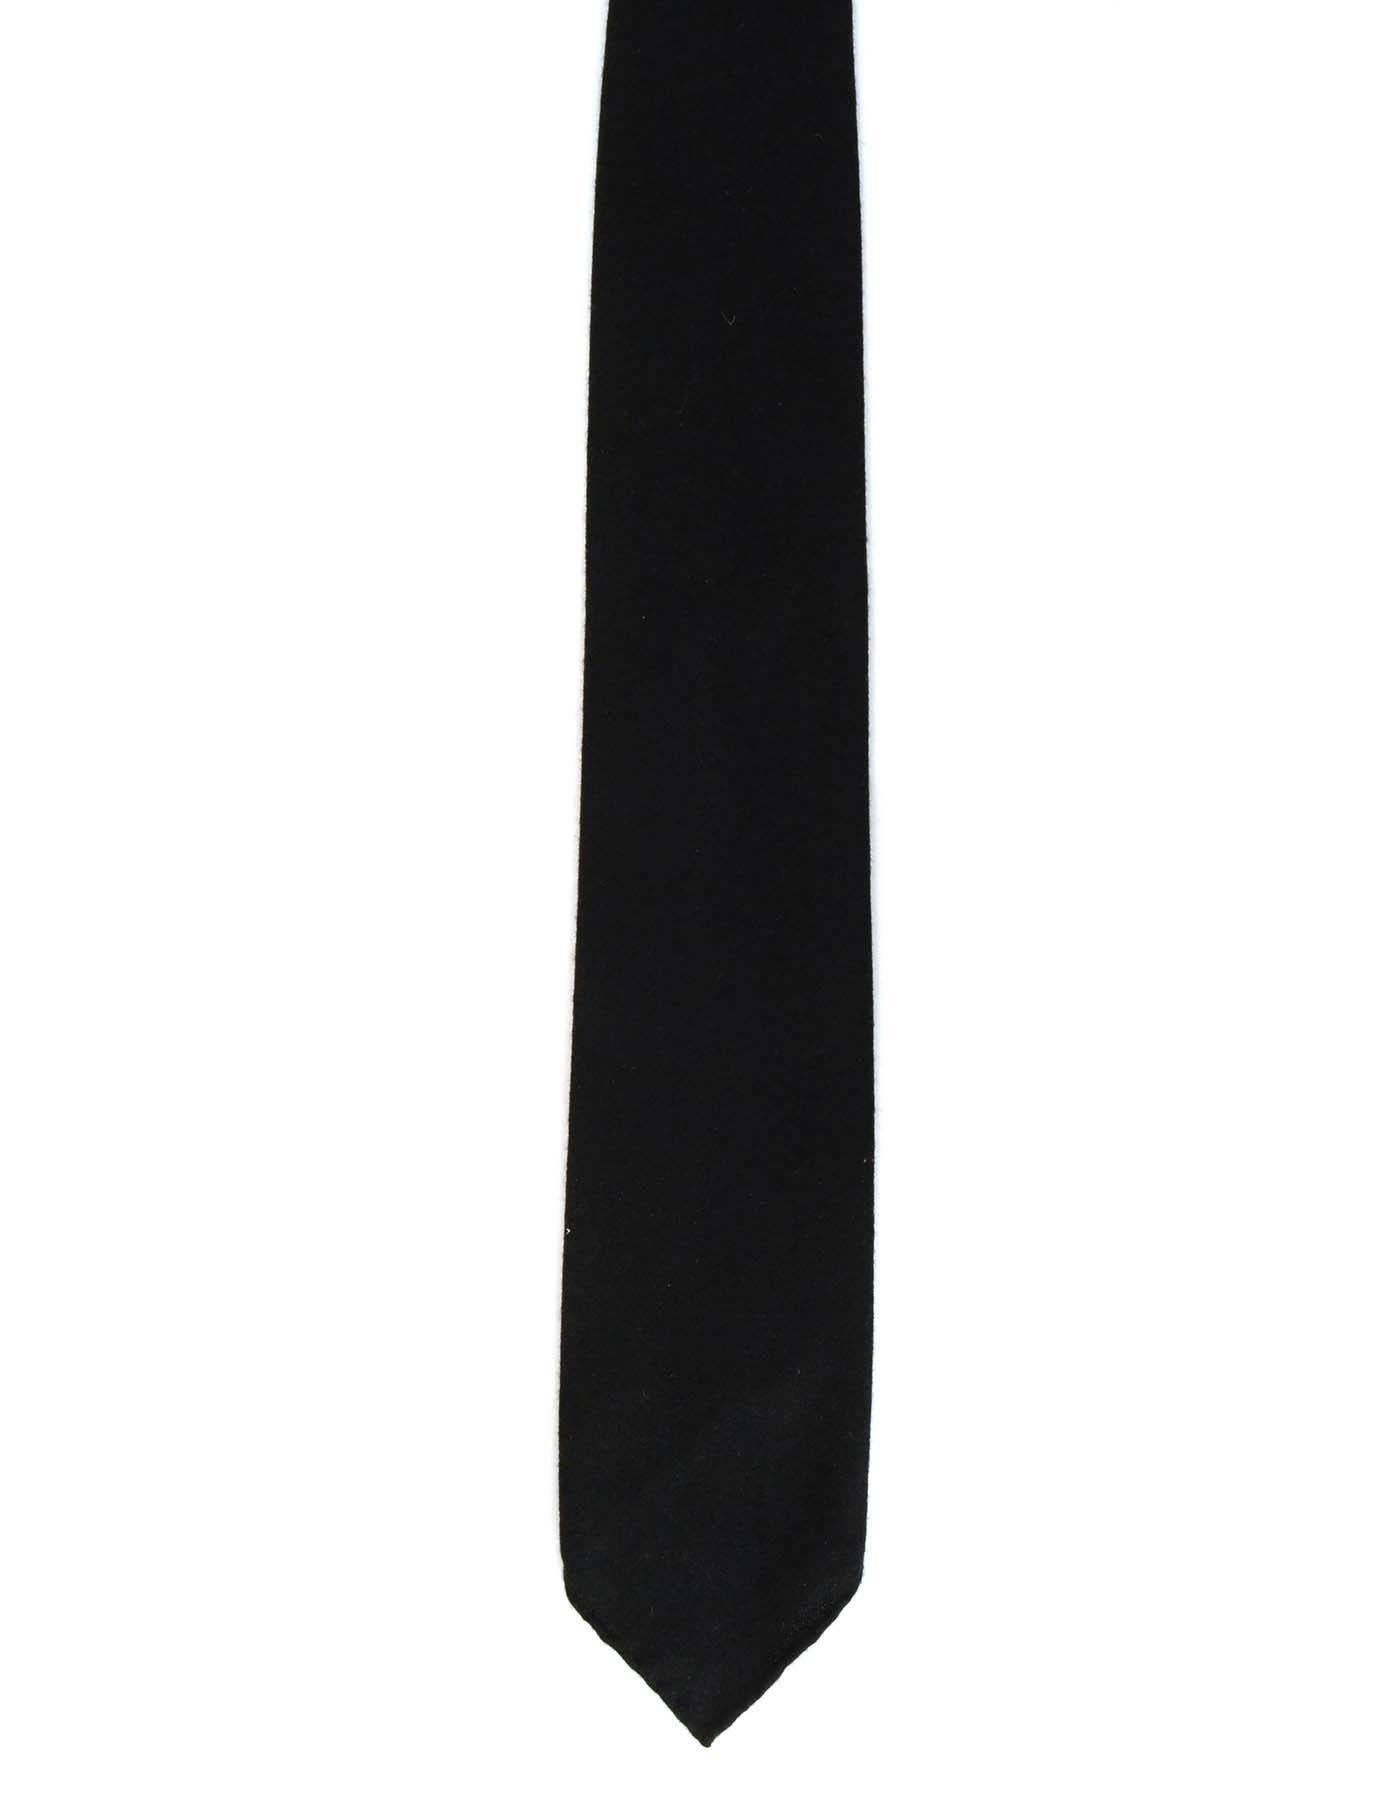 Hermes Black Cashmere Tie
Made In: France
Color: Black
Composition: 100% cashmere
Overall Condition: Excellent pre-owned condition
Measurements: 
Length: 60